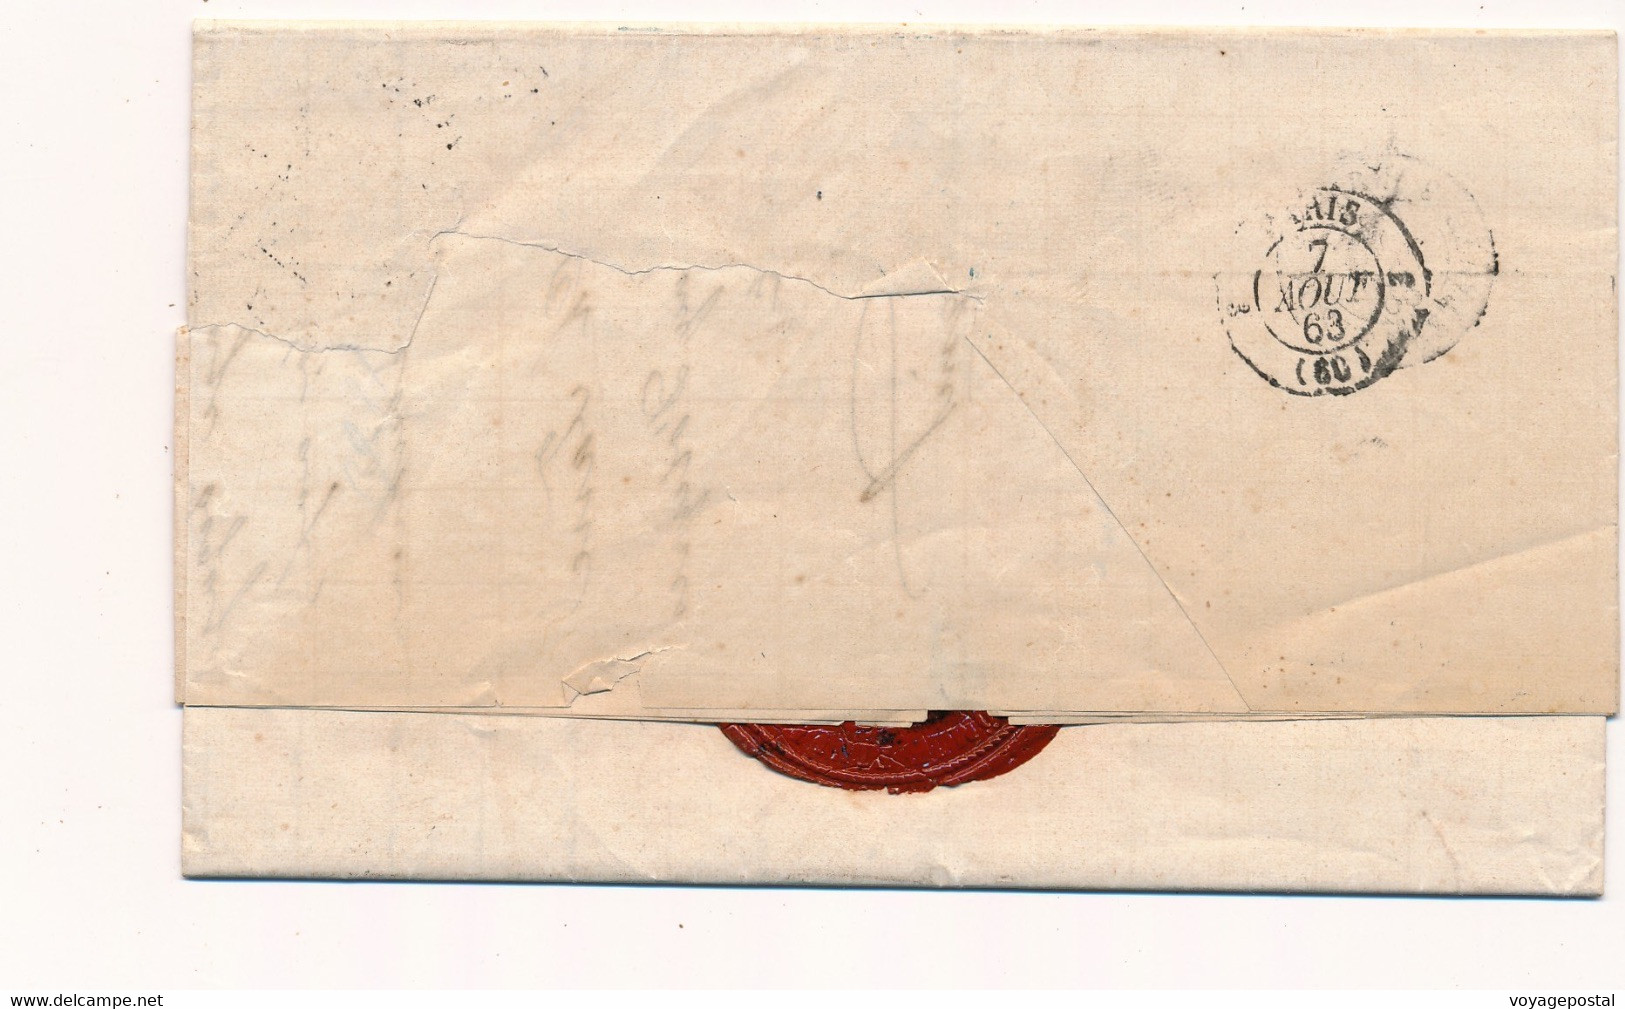 LETTRE HELSINGFORS FINLANDE RUSSIE FRANCO PARIS ROTHSCHILD COVER FINLAND RUSSIA - Covers & Documents